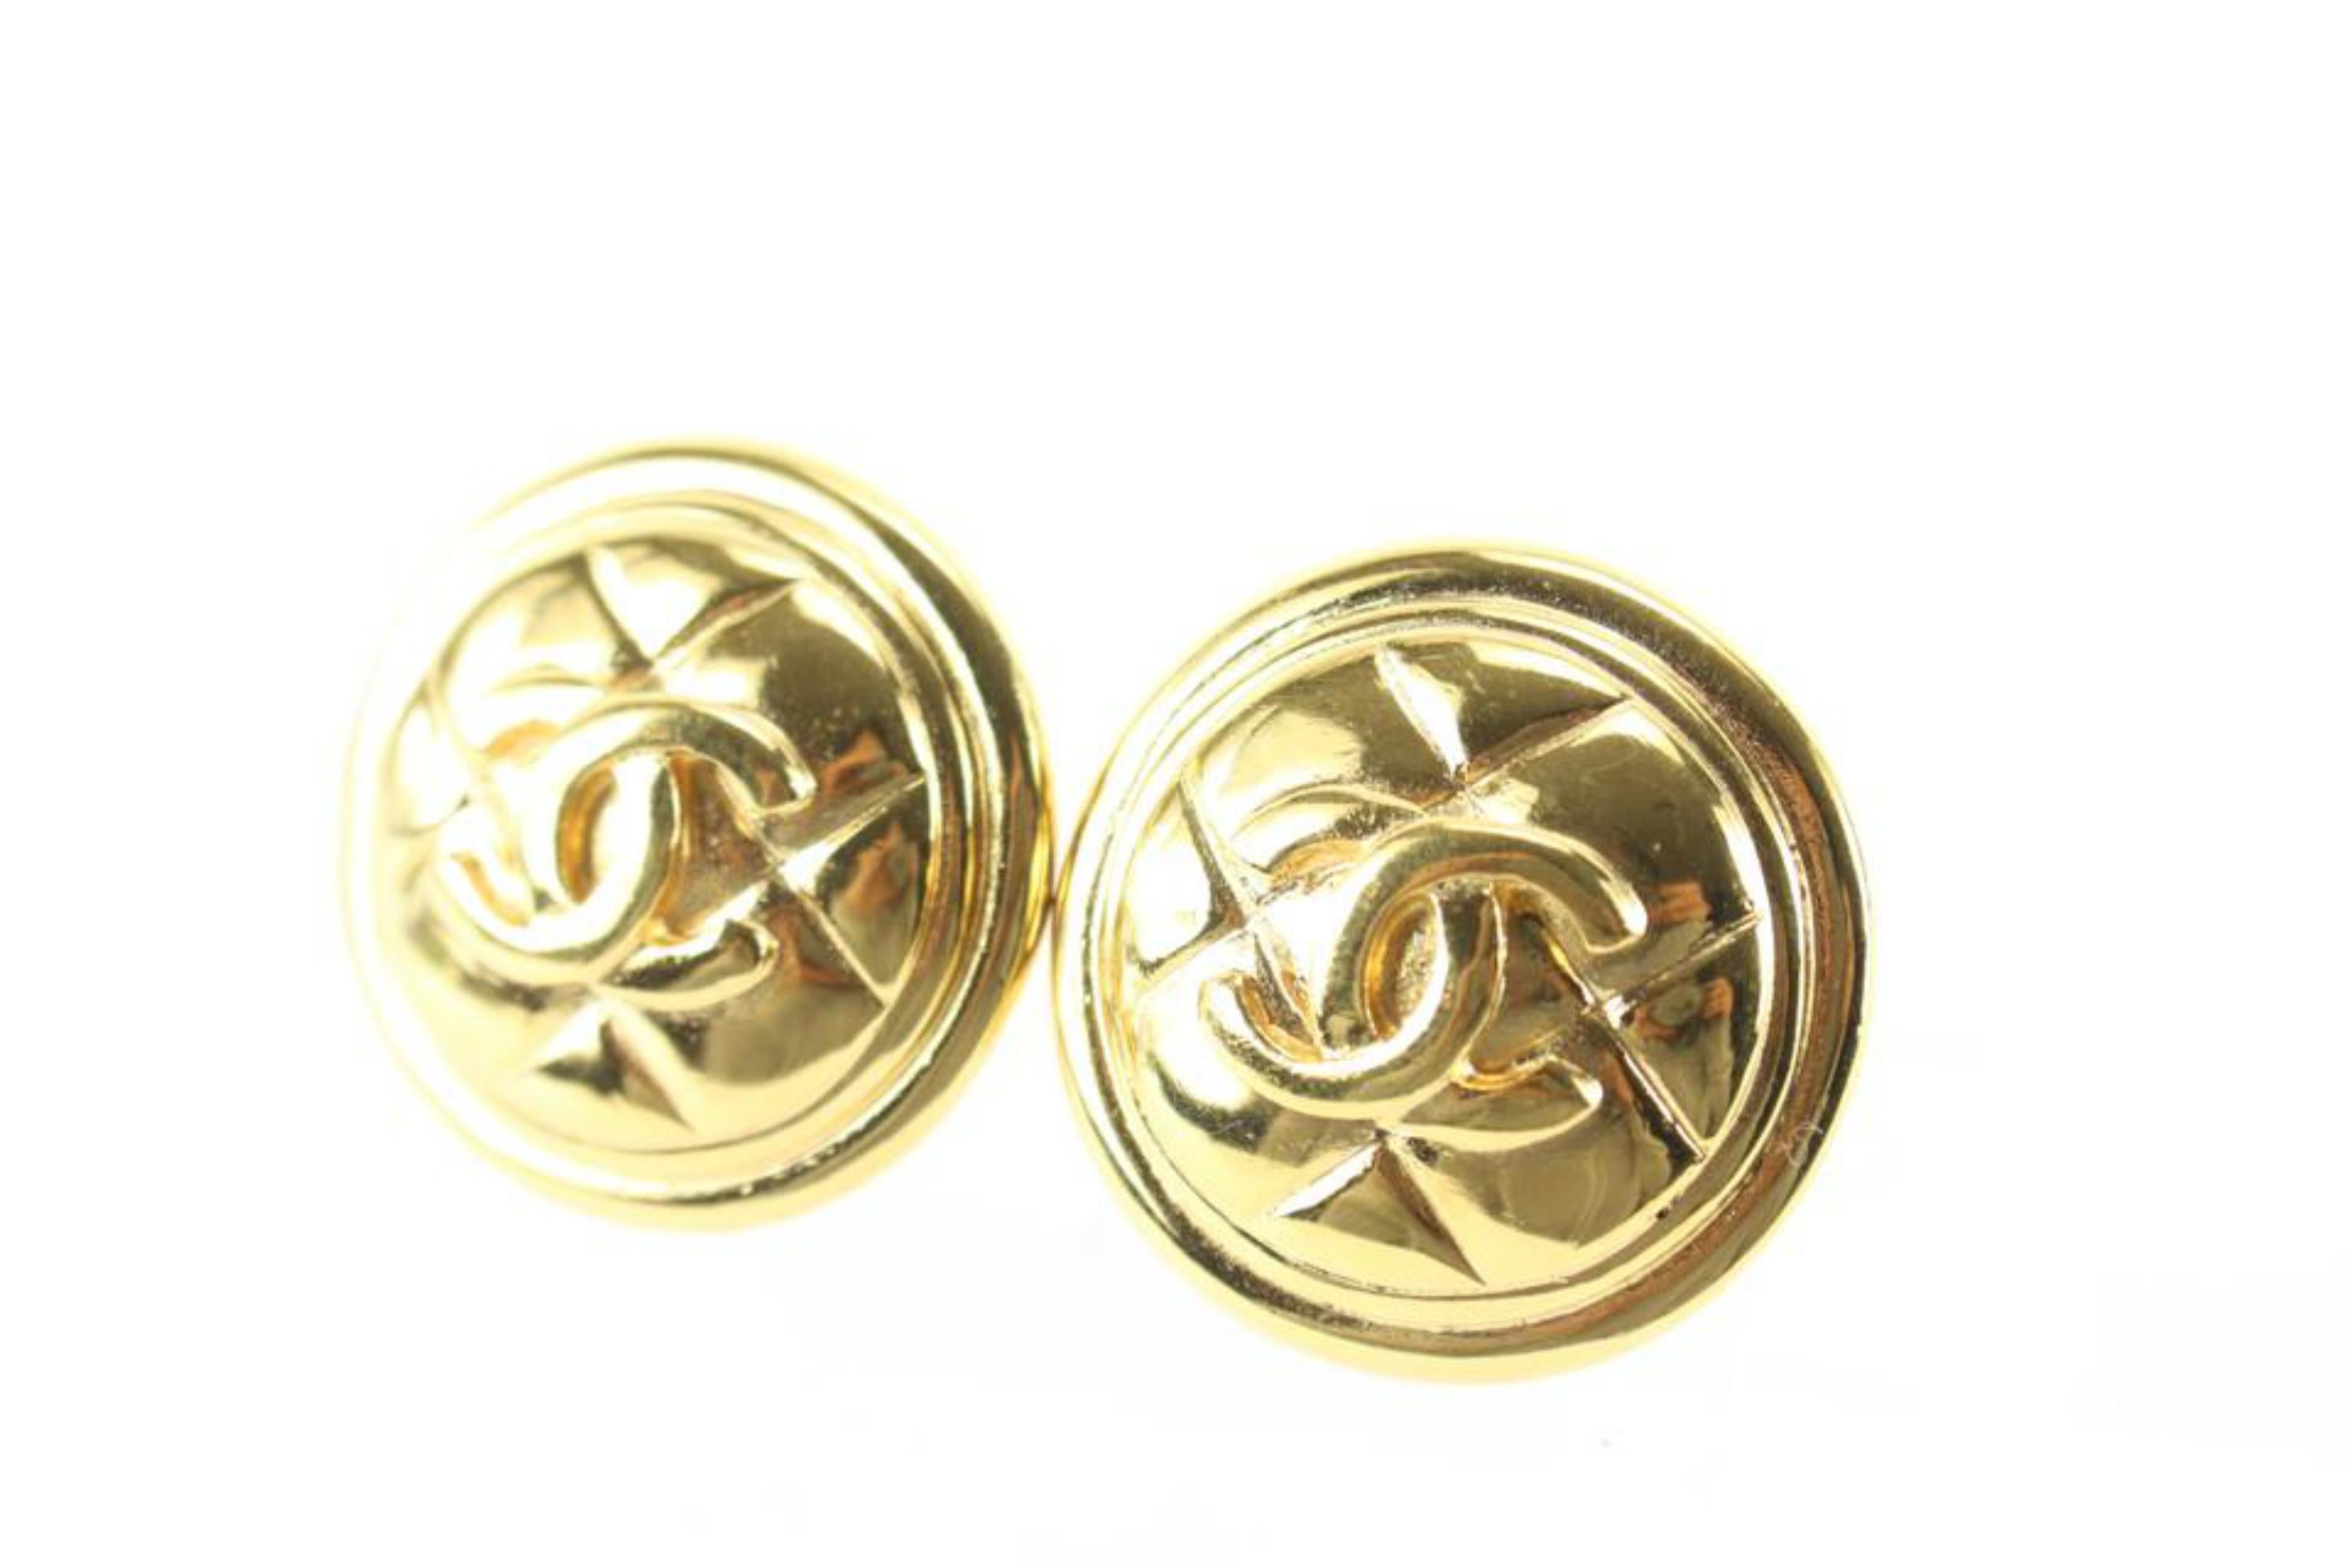 Chanel 24k Gold Plated Quilted CC Logo Earrings 95ck822s 7